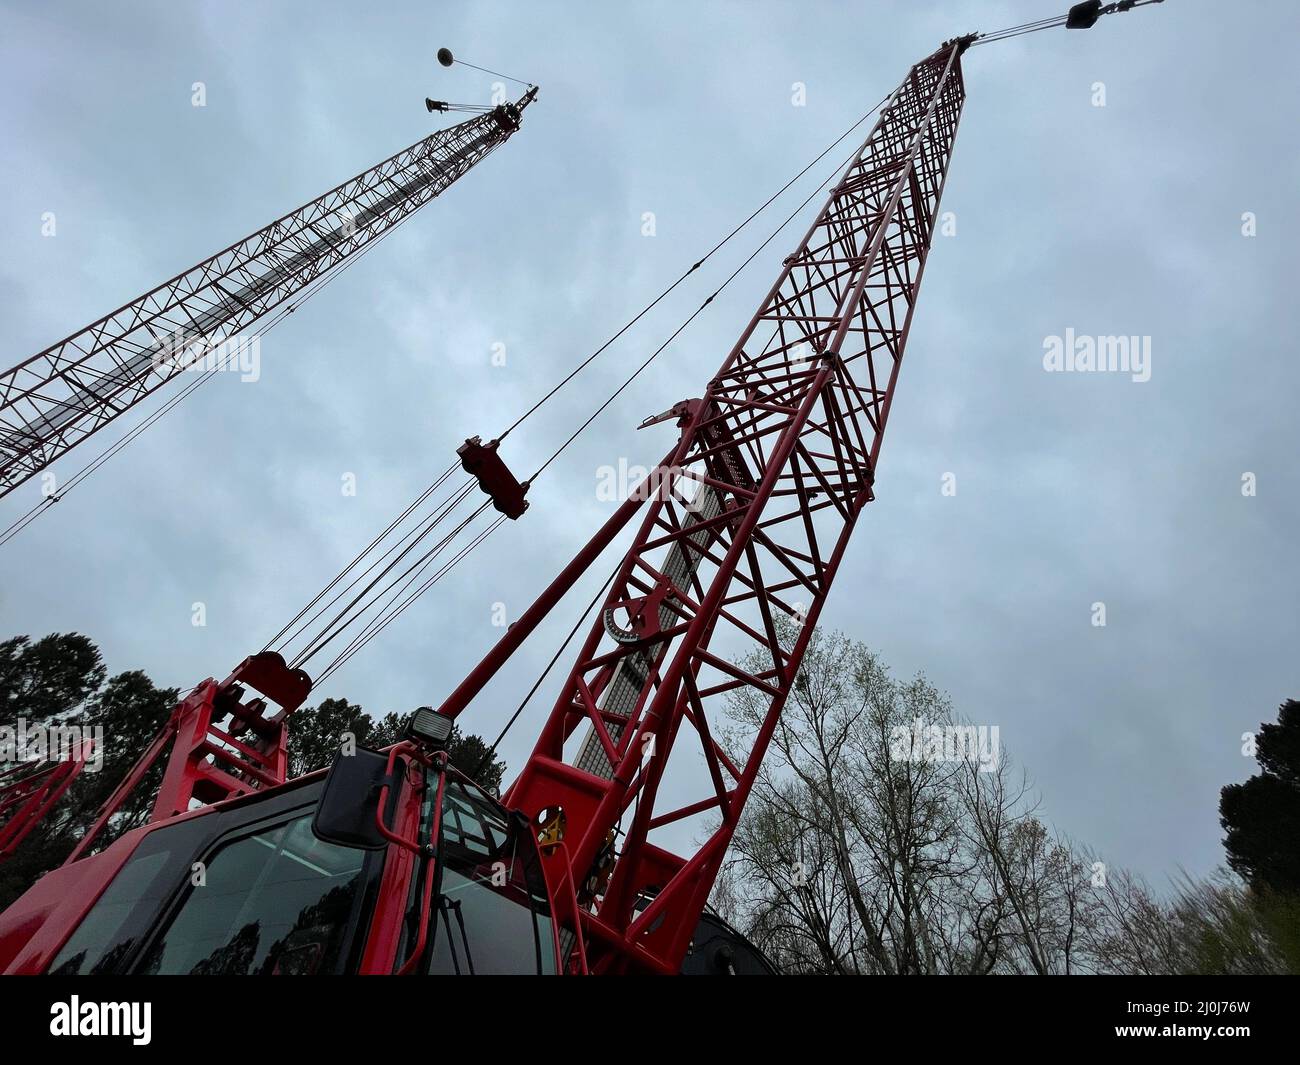 Augusta, Ga USA - 03 19 22: Manitowoc Red Crane Construction scene cloudy rainy day two booms and sky Stock Photo